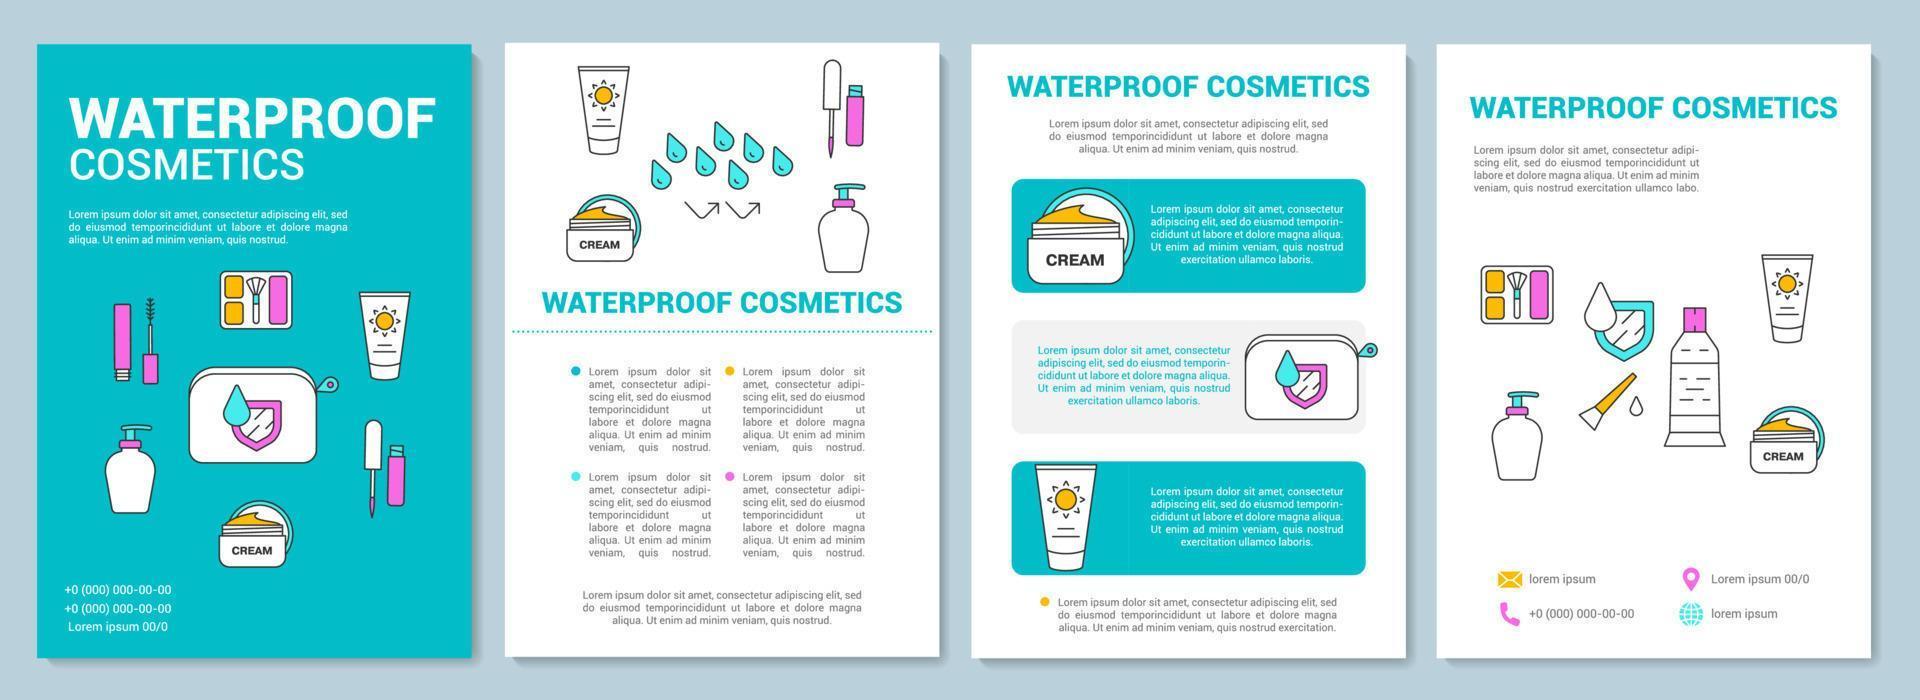 Waterproof cosmetics, makeup products brochure template layout. Flyer, booklet, leaflet print design with linear illustrations. Vector page layouts for magazines, annual reports, advertising posters..